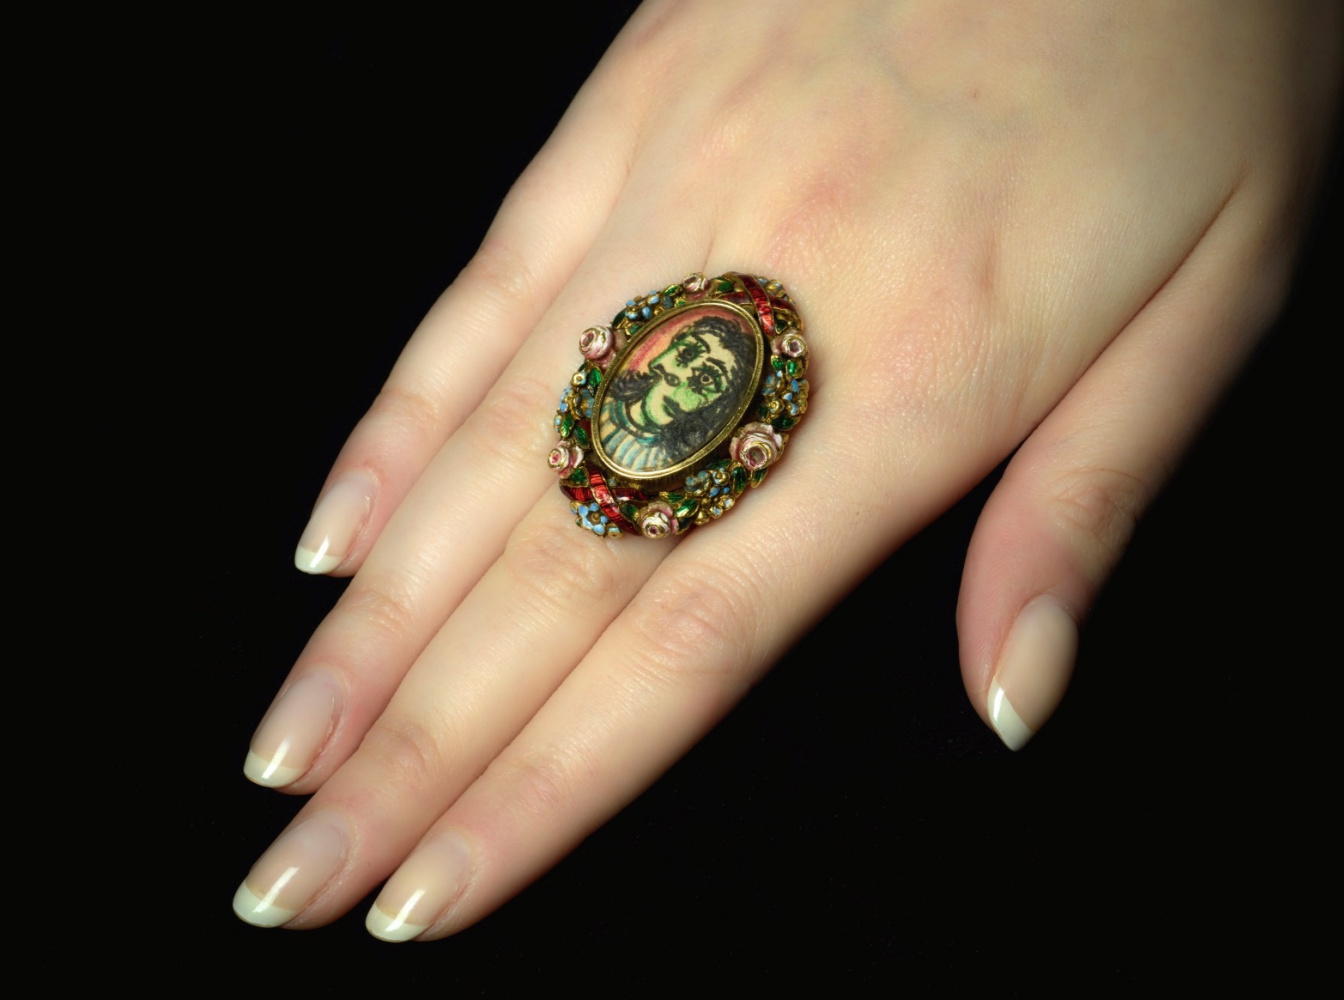 Sotheby’s to sell a hand-painted ring Picasso designed for his muse